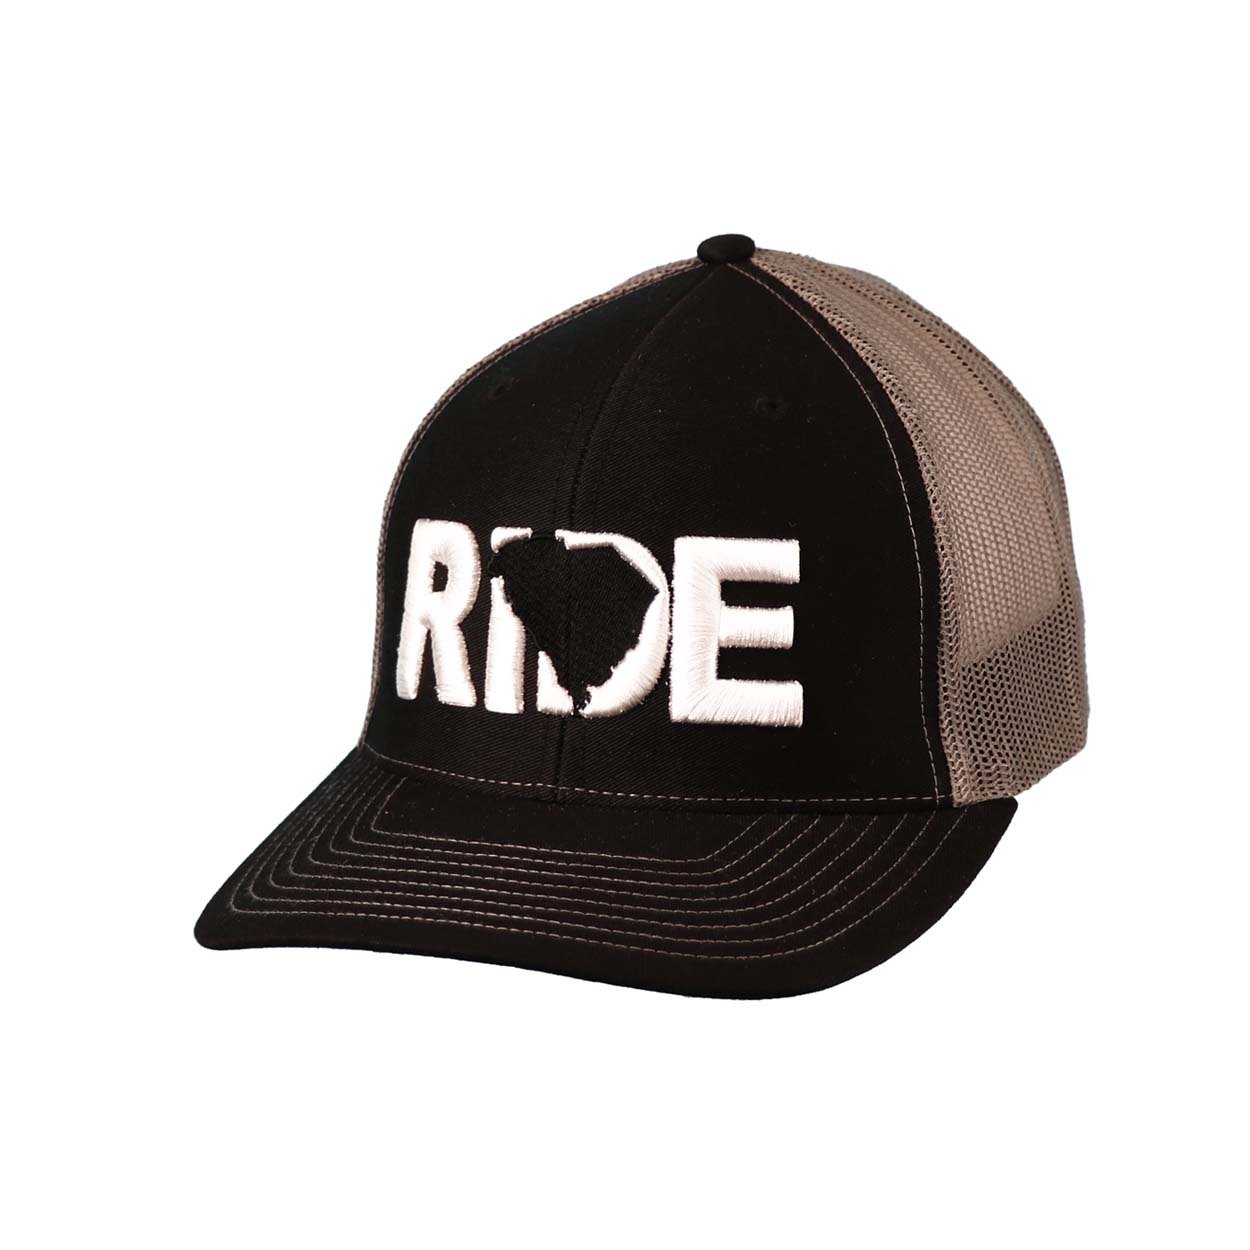 Ride South Carolina Classic Embroidered Snapback Trucker Hat Black/Charcoal